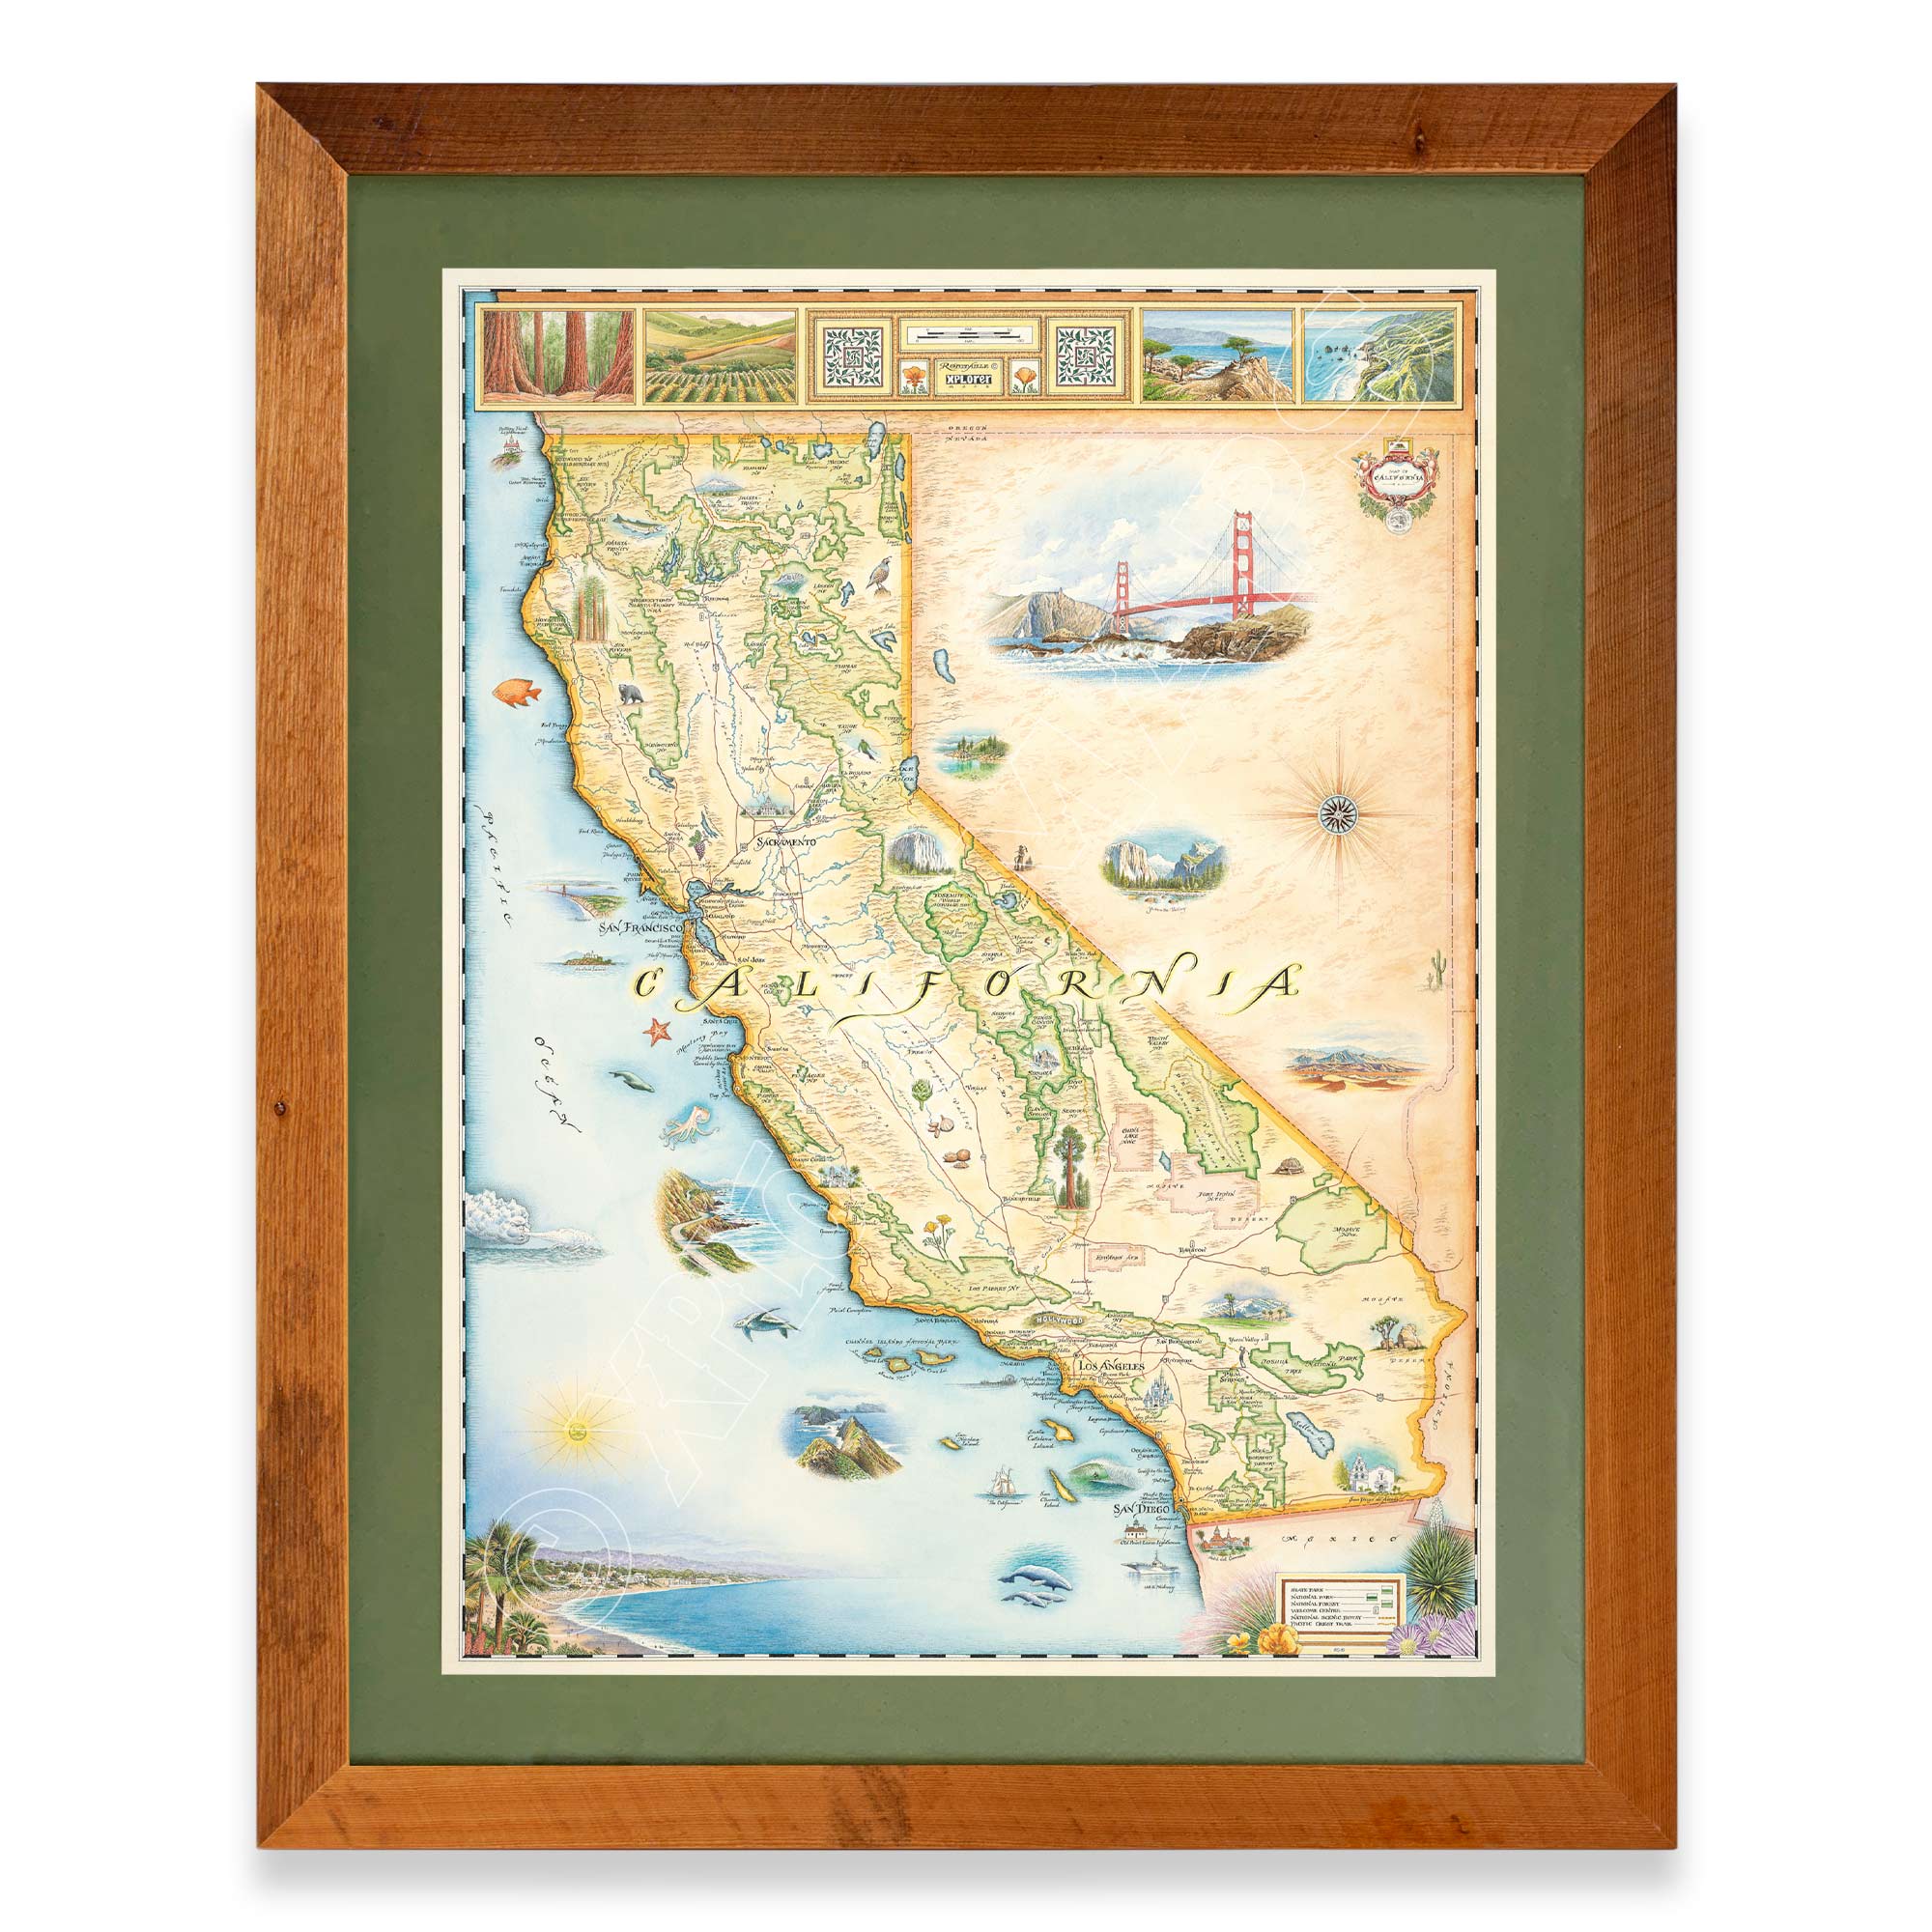 California hand-drawn map in a Montana Flathead Lake reclaimed larch wood frame and green mat. 